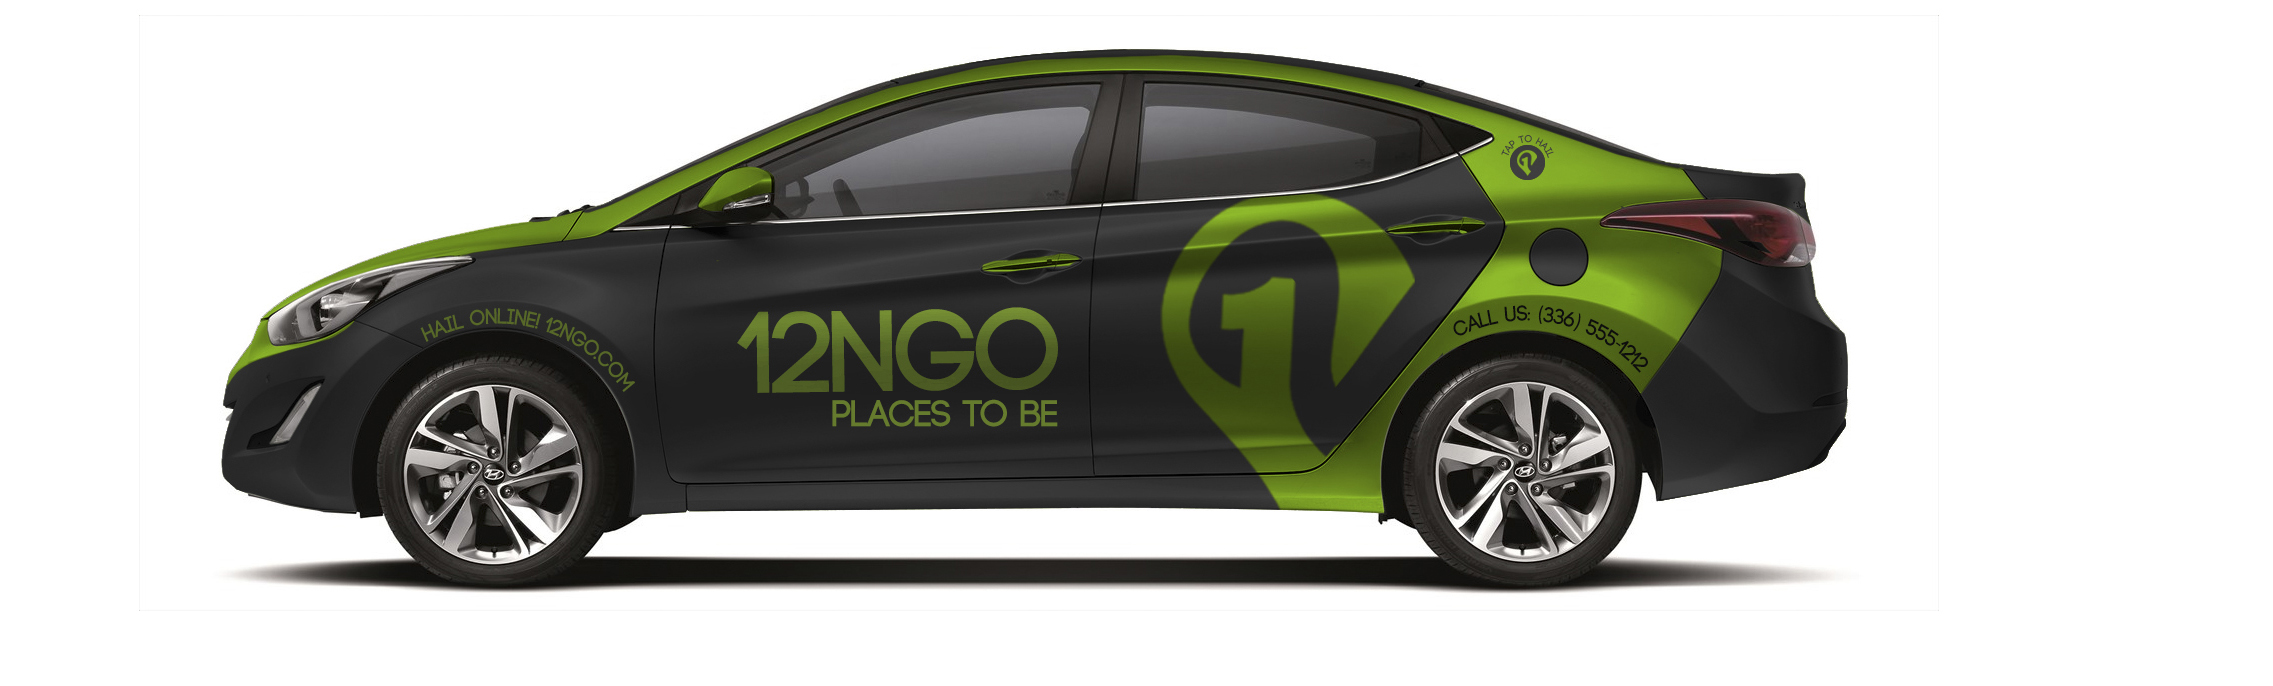 12'n'Go Vehicle Wrap Side View